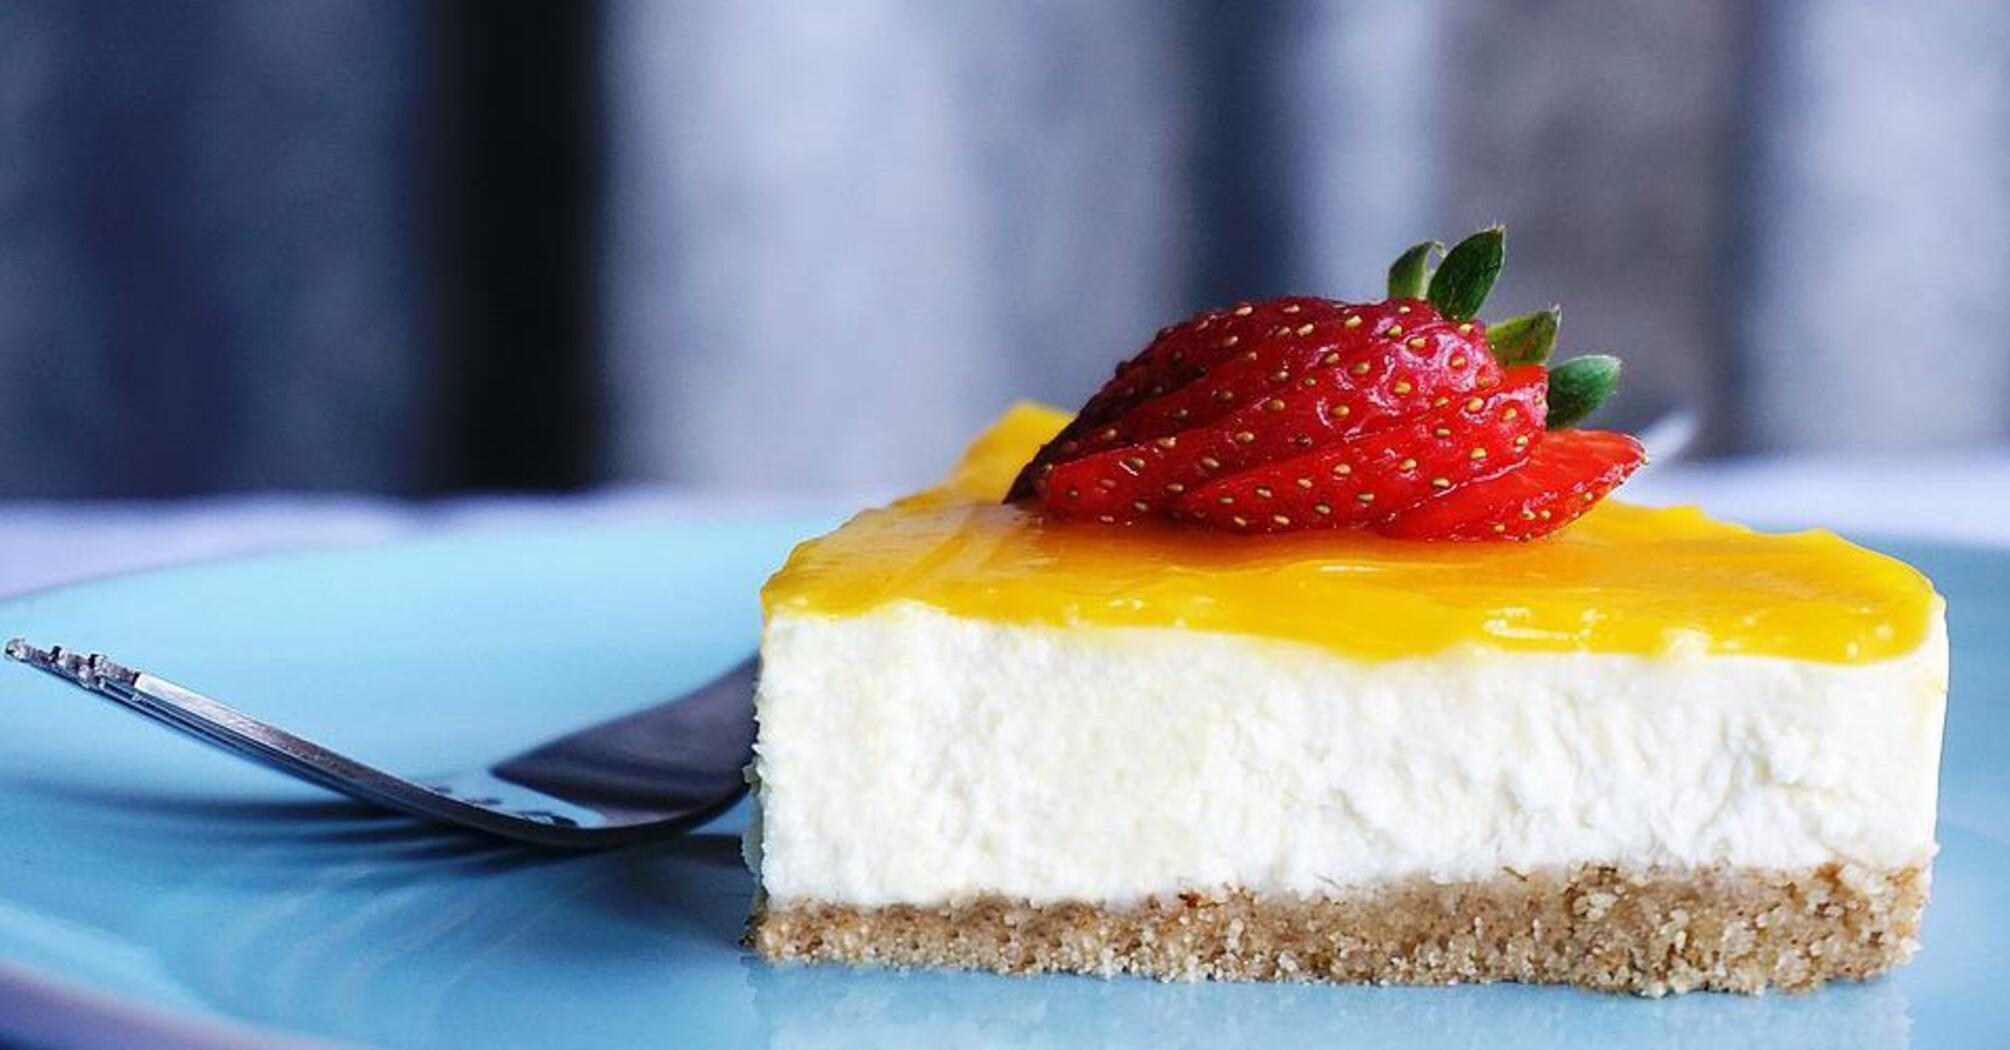 No-bake cheesecake: an idea for an elementary dessert for the whole family